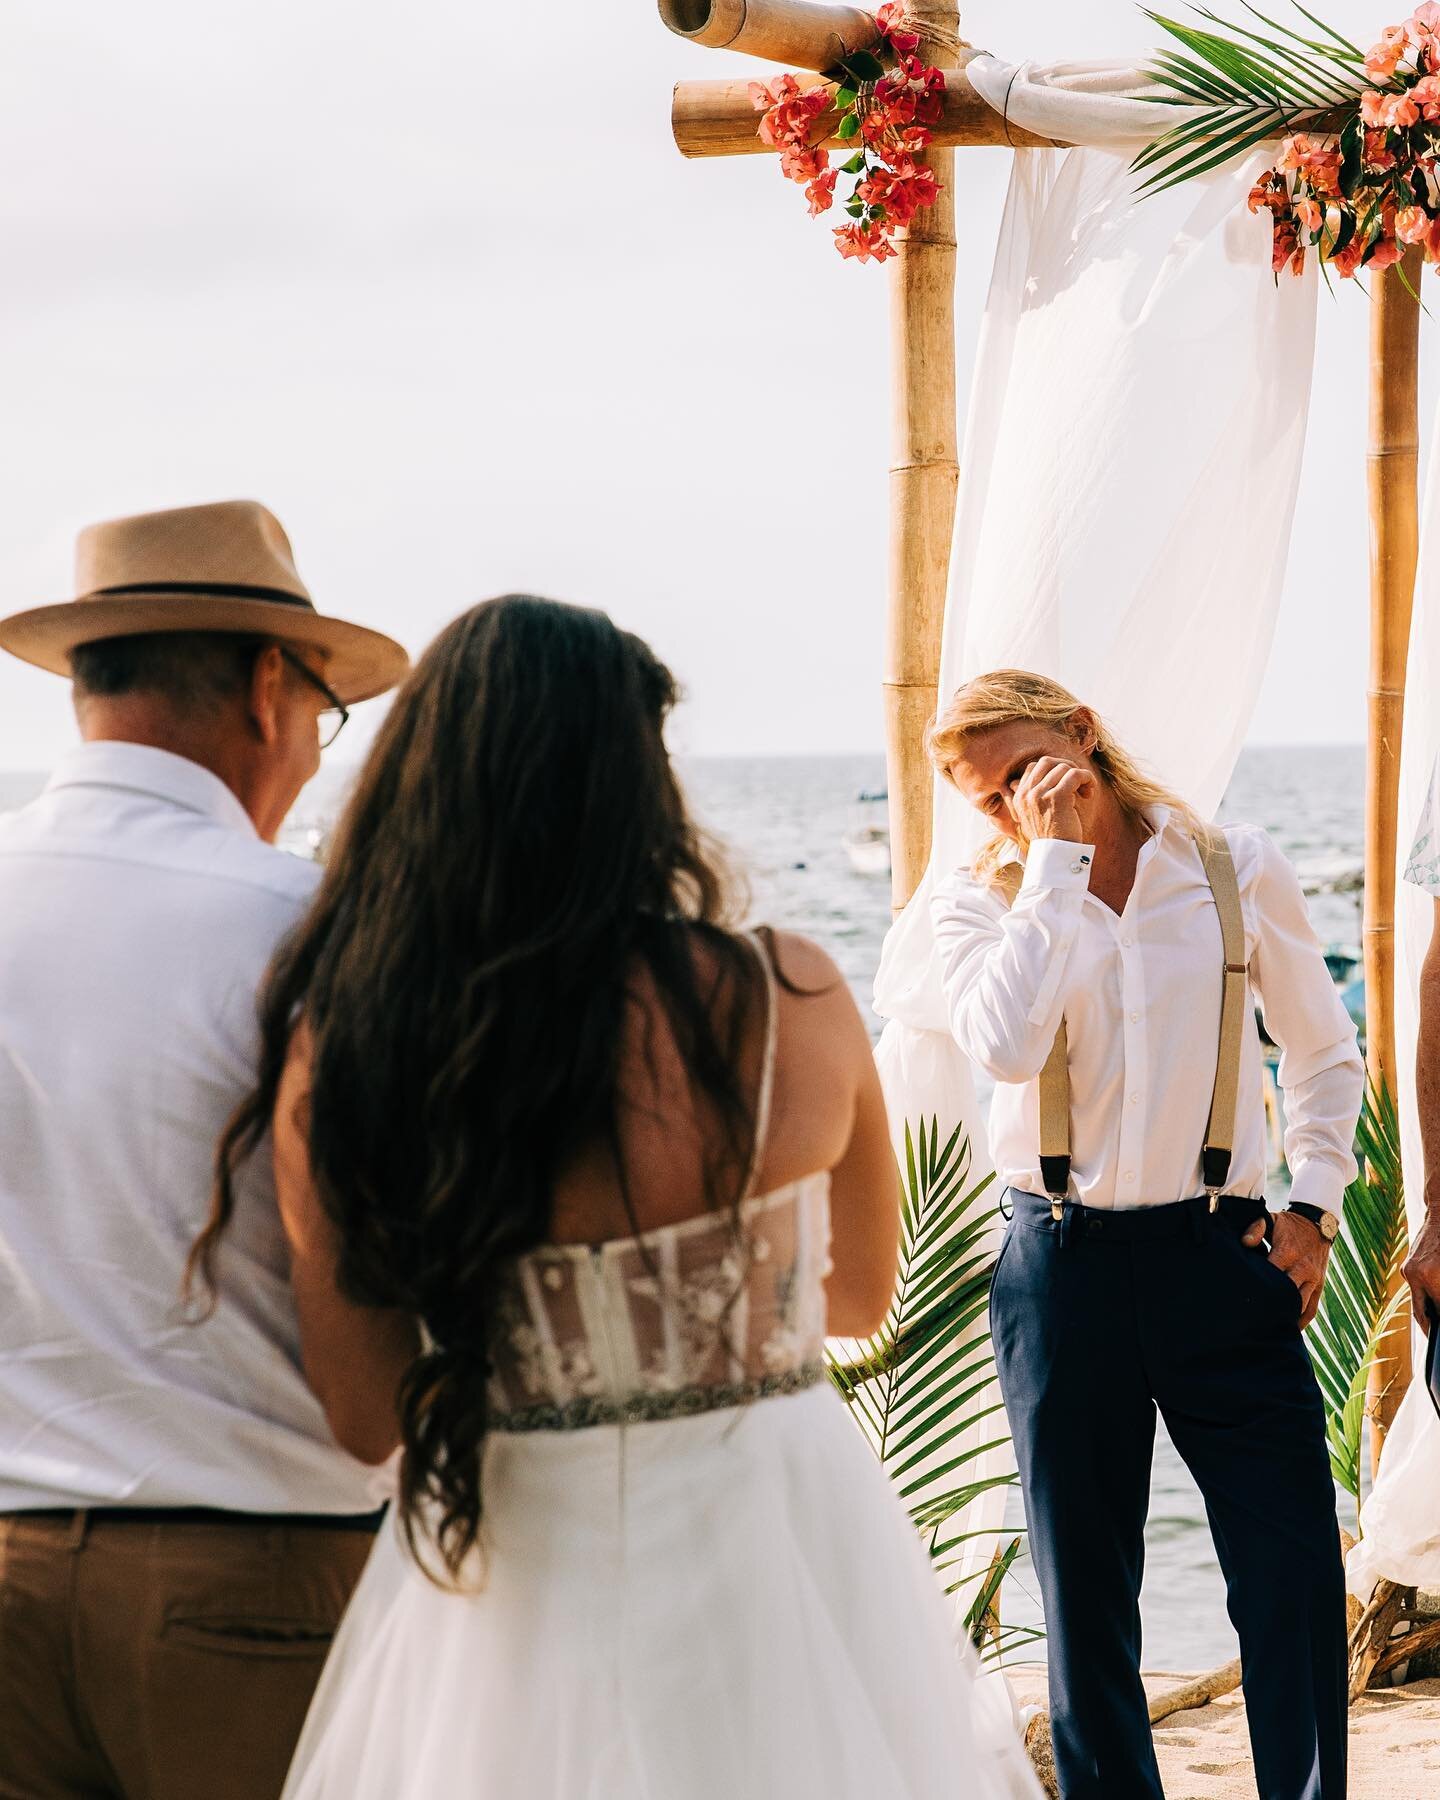 Just 2 seconds of their 10 year love story with decades more to come. 
.
.
.
.
#reallove #miramaryelapa #yelapa #sarahgalliphotography #beachlovers #yelapaweddingphotographer#yelapaportraitphotographer #loveislove #bougainvillea